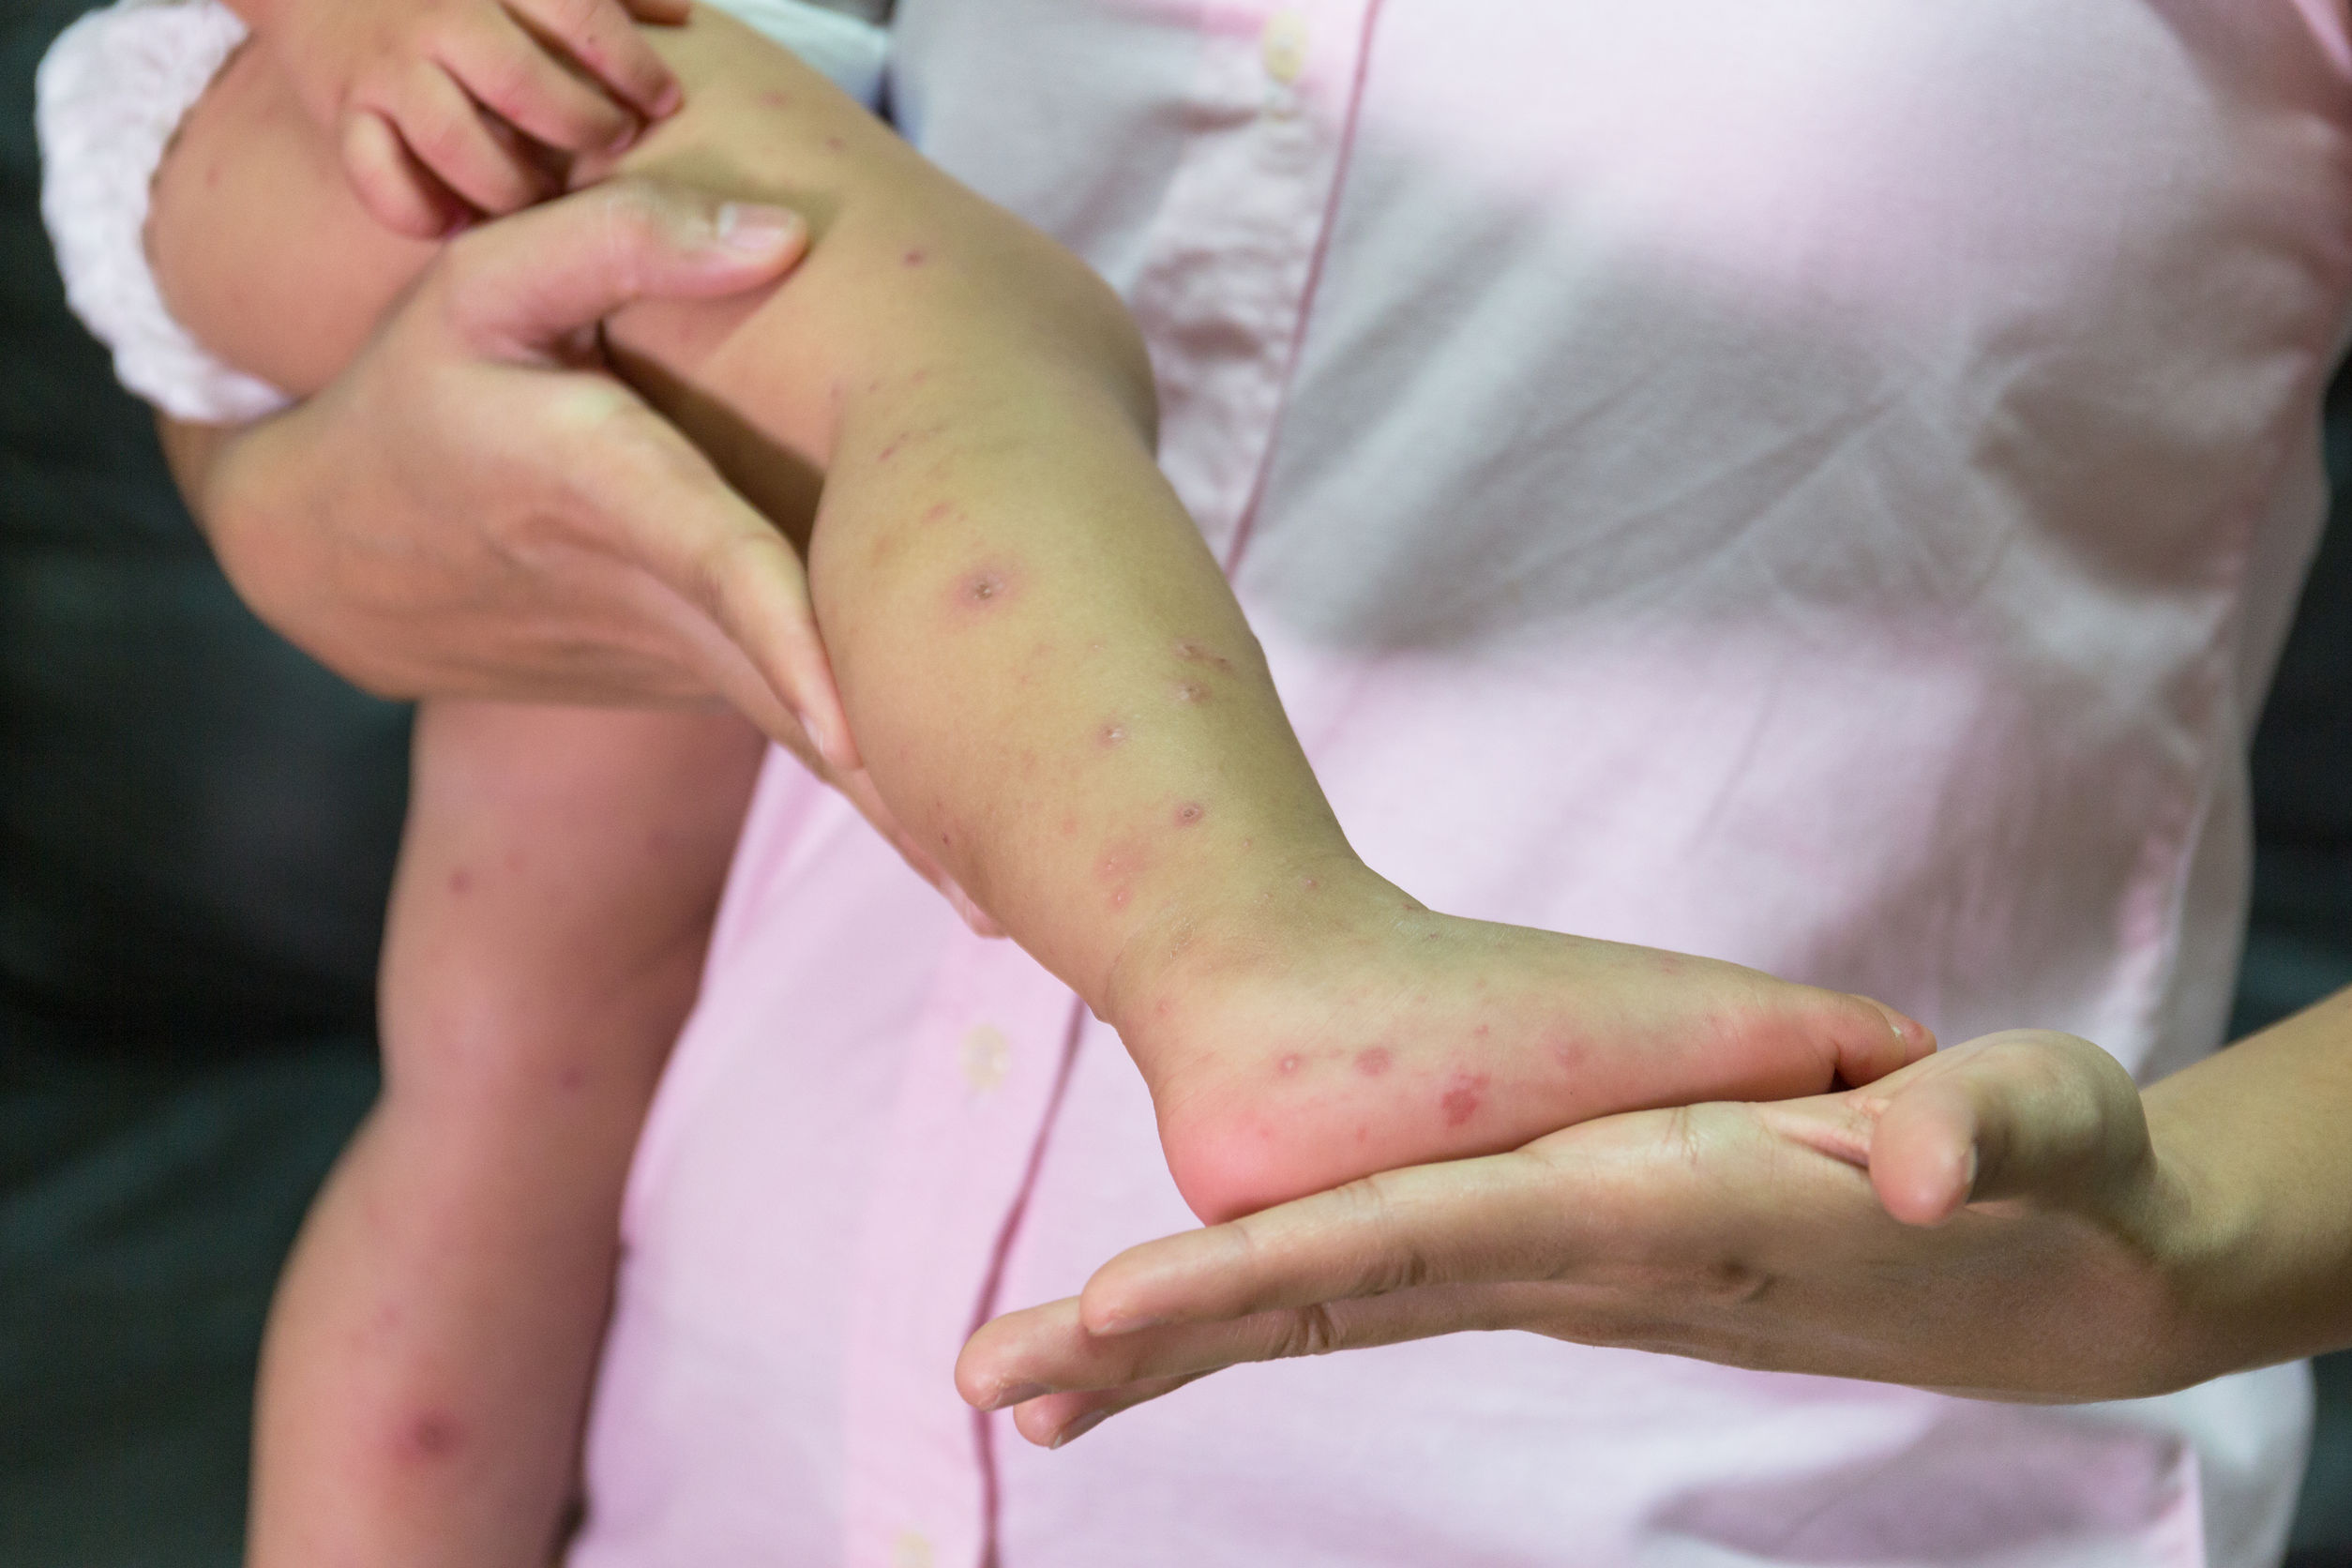 Measles outbreak worsens: 13 now diagnosed